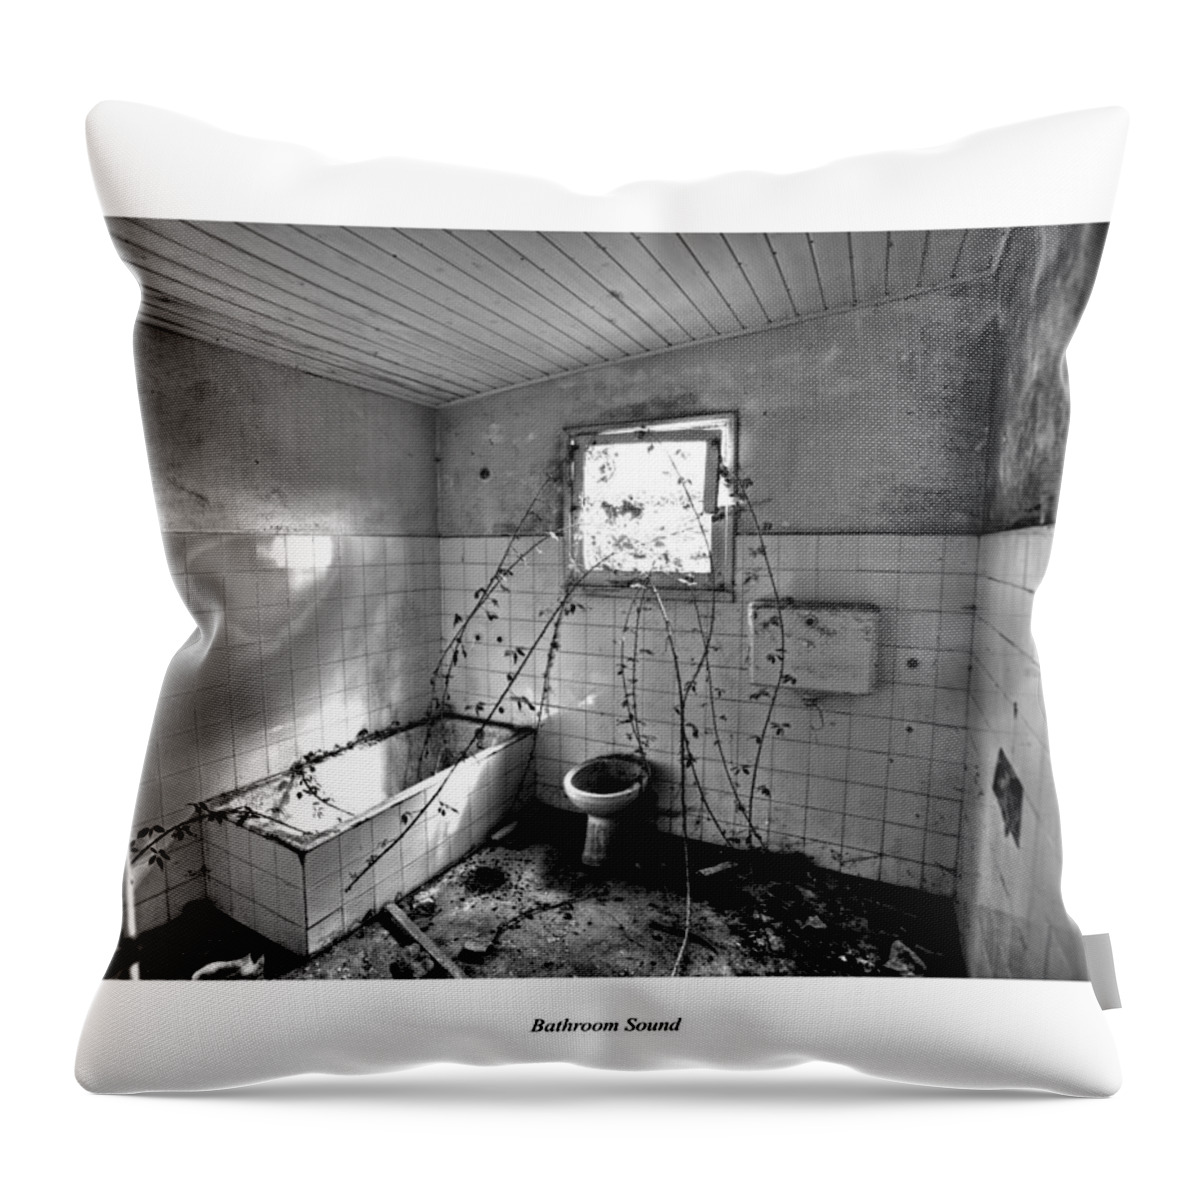 Over Throw Pillow featuring the photograph Bathroom Sound by Joseph Amaral